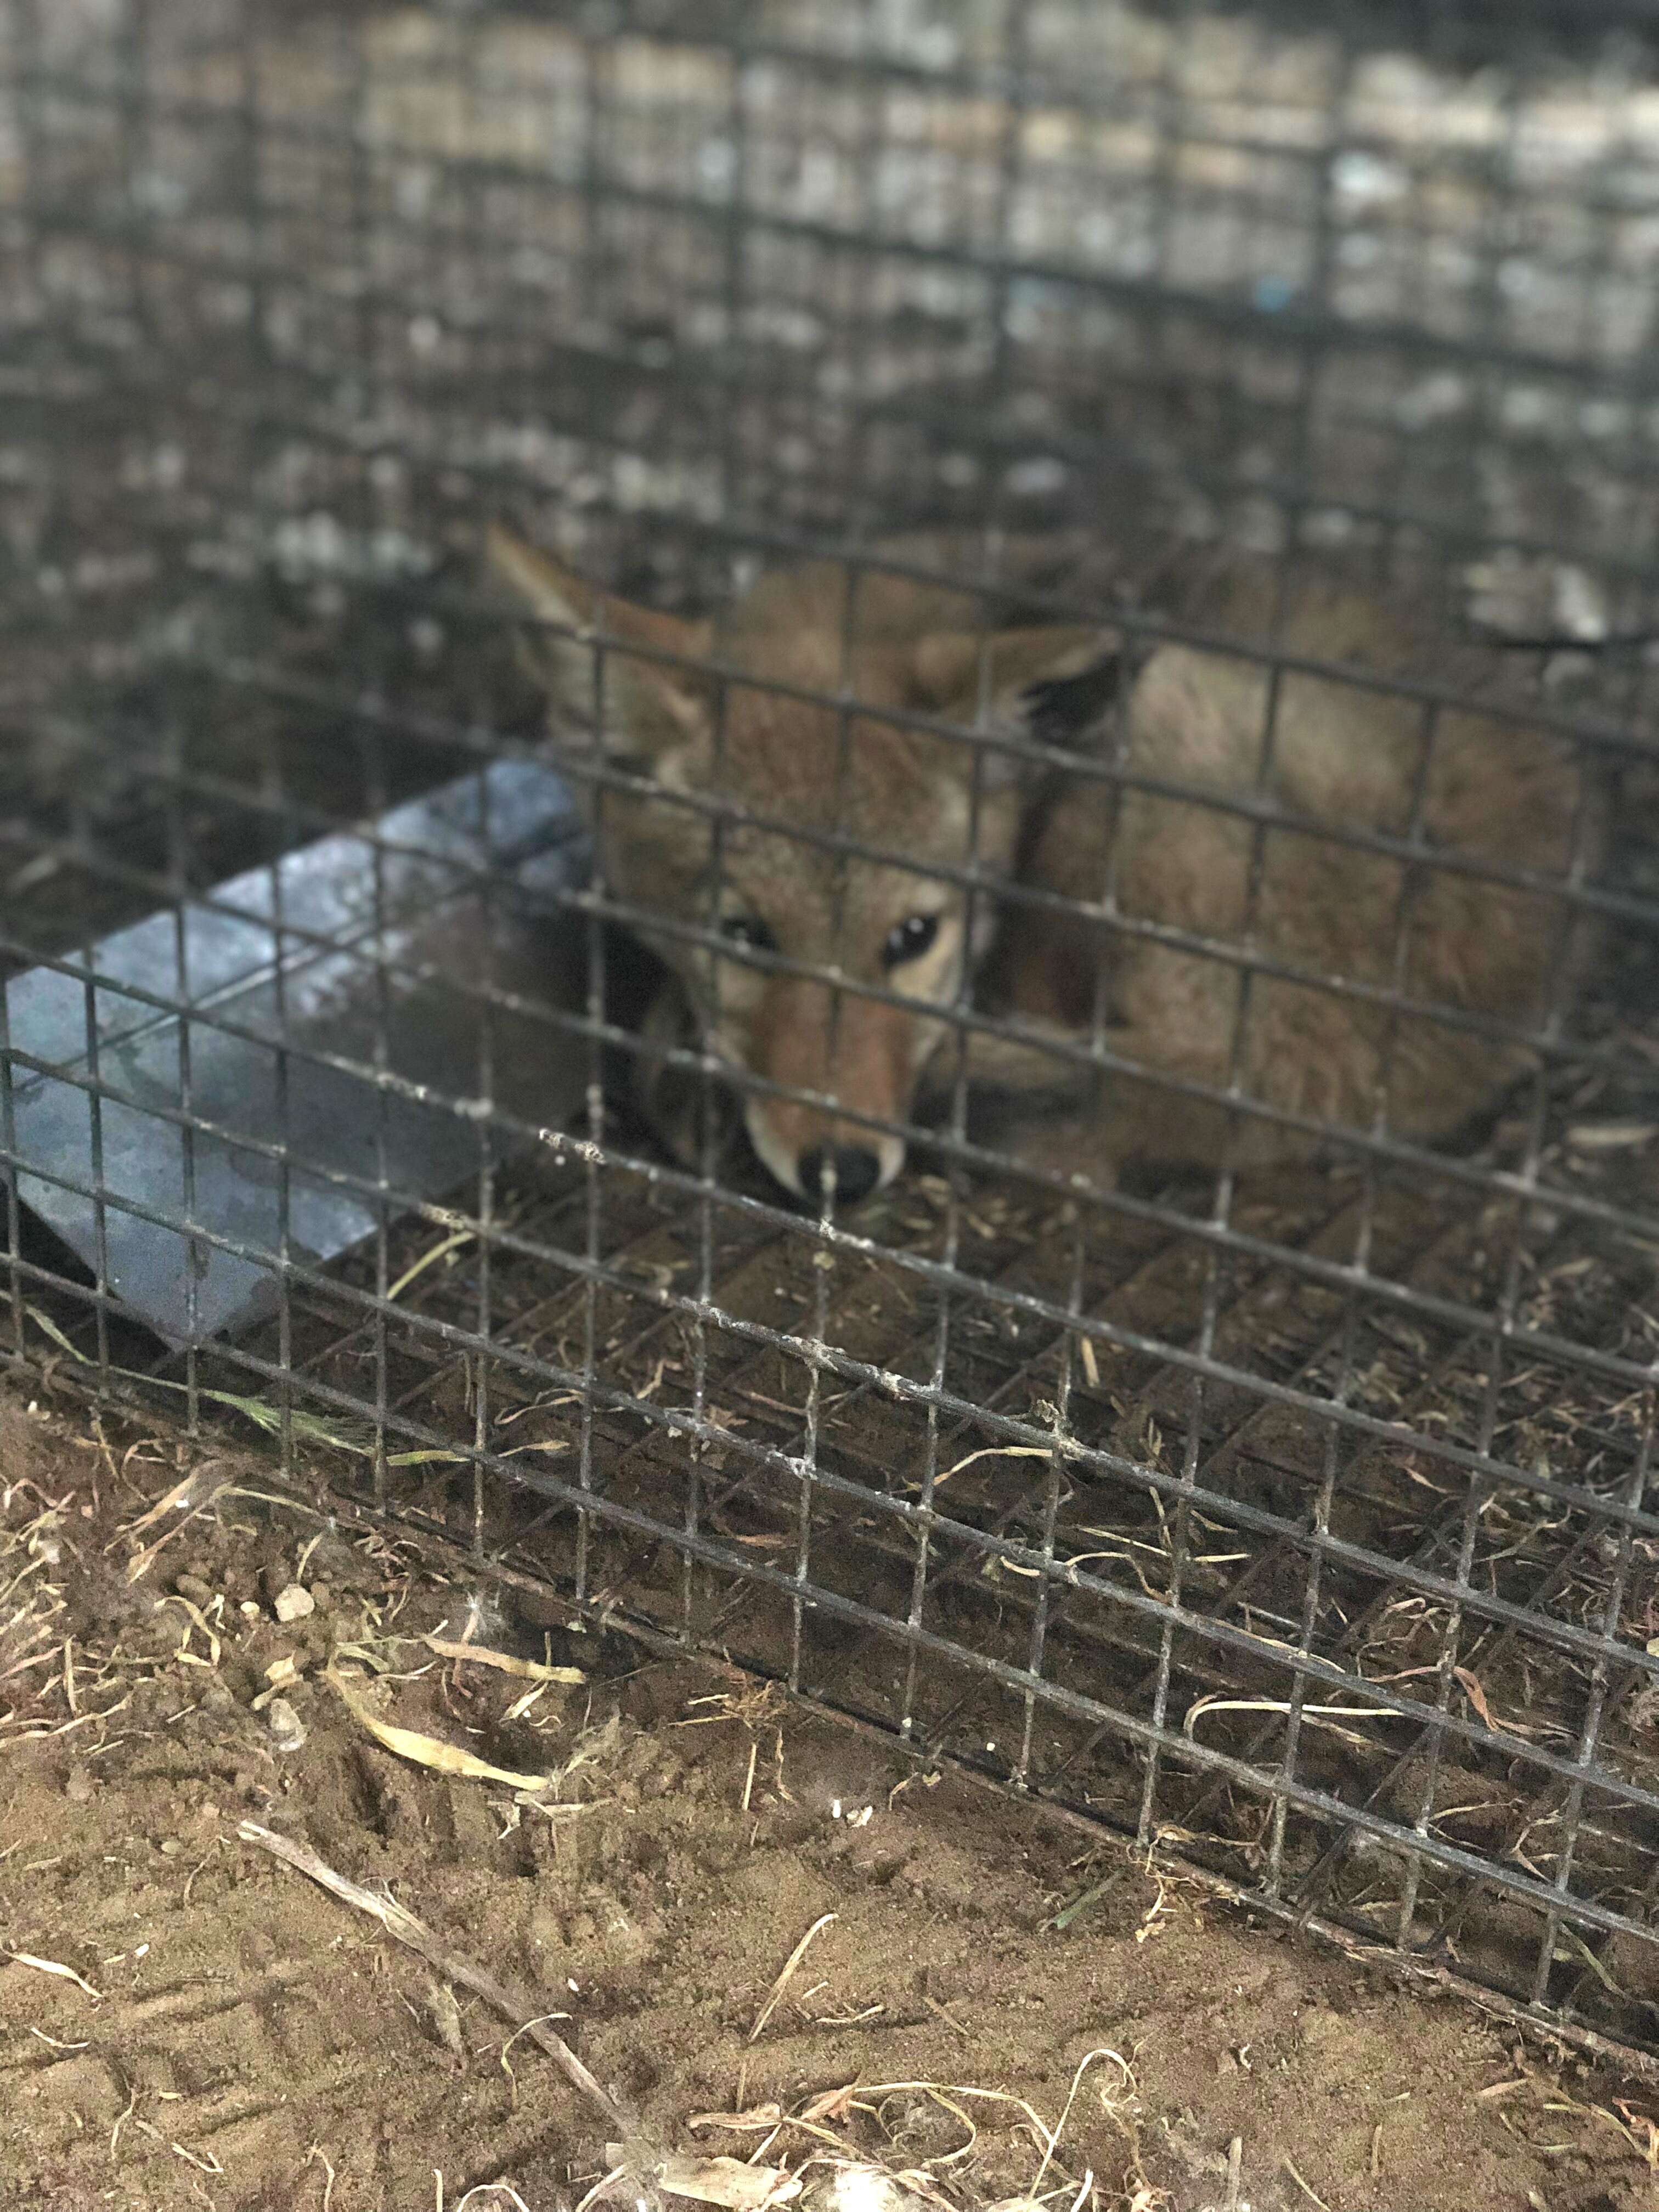 Baby coyote inside cage